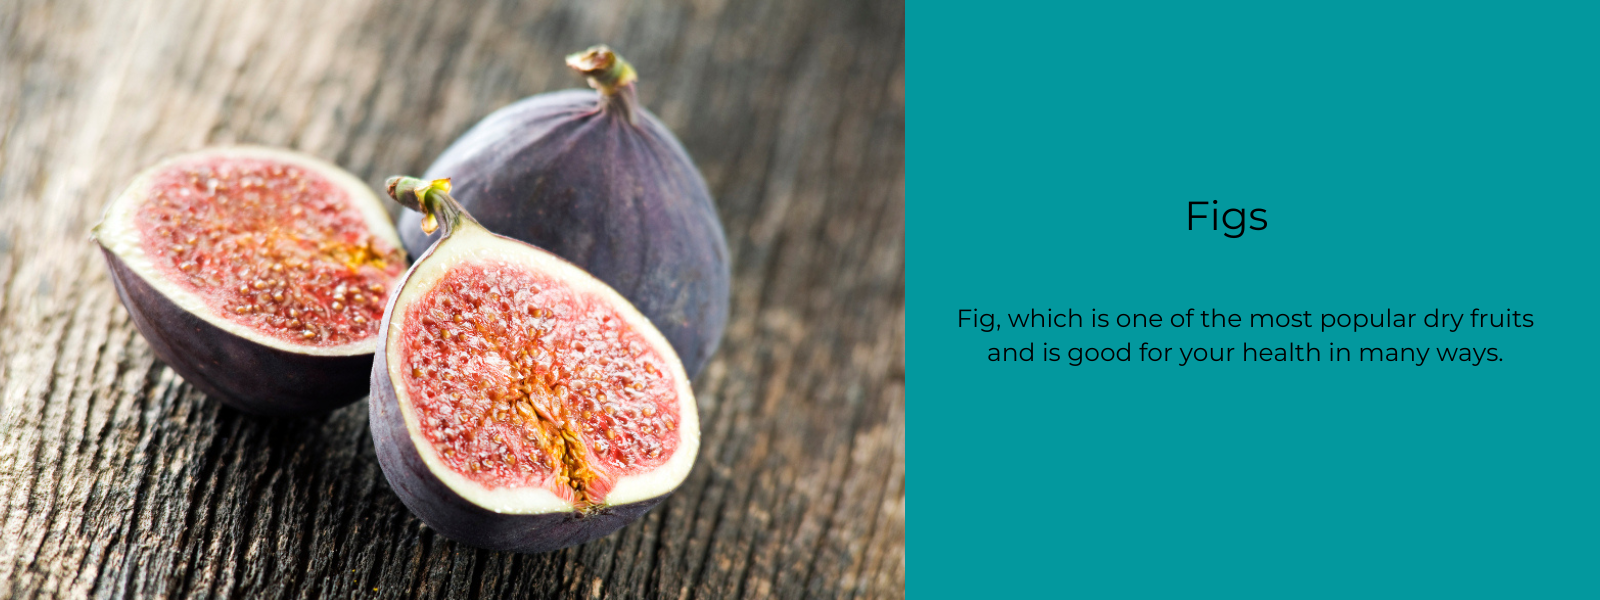 Figs - Health Benefits, Uses and Important Facts